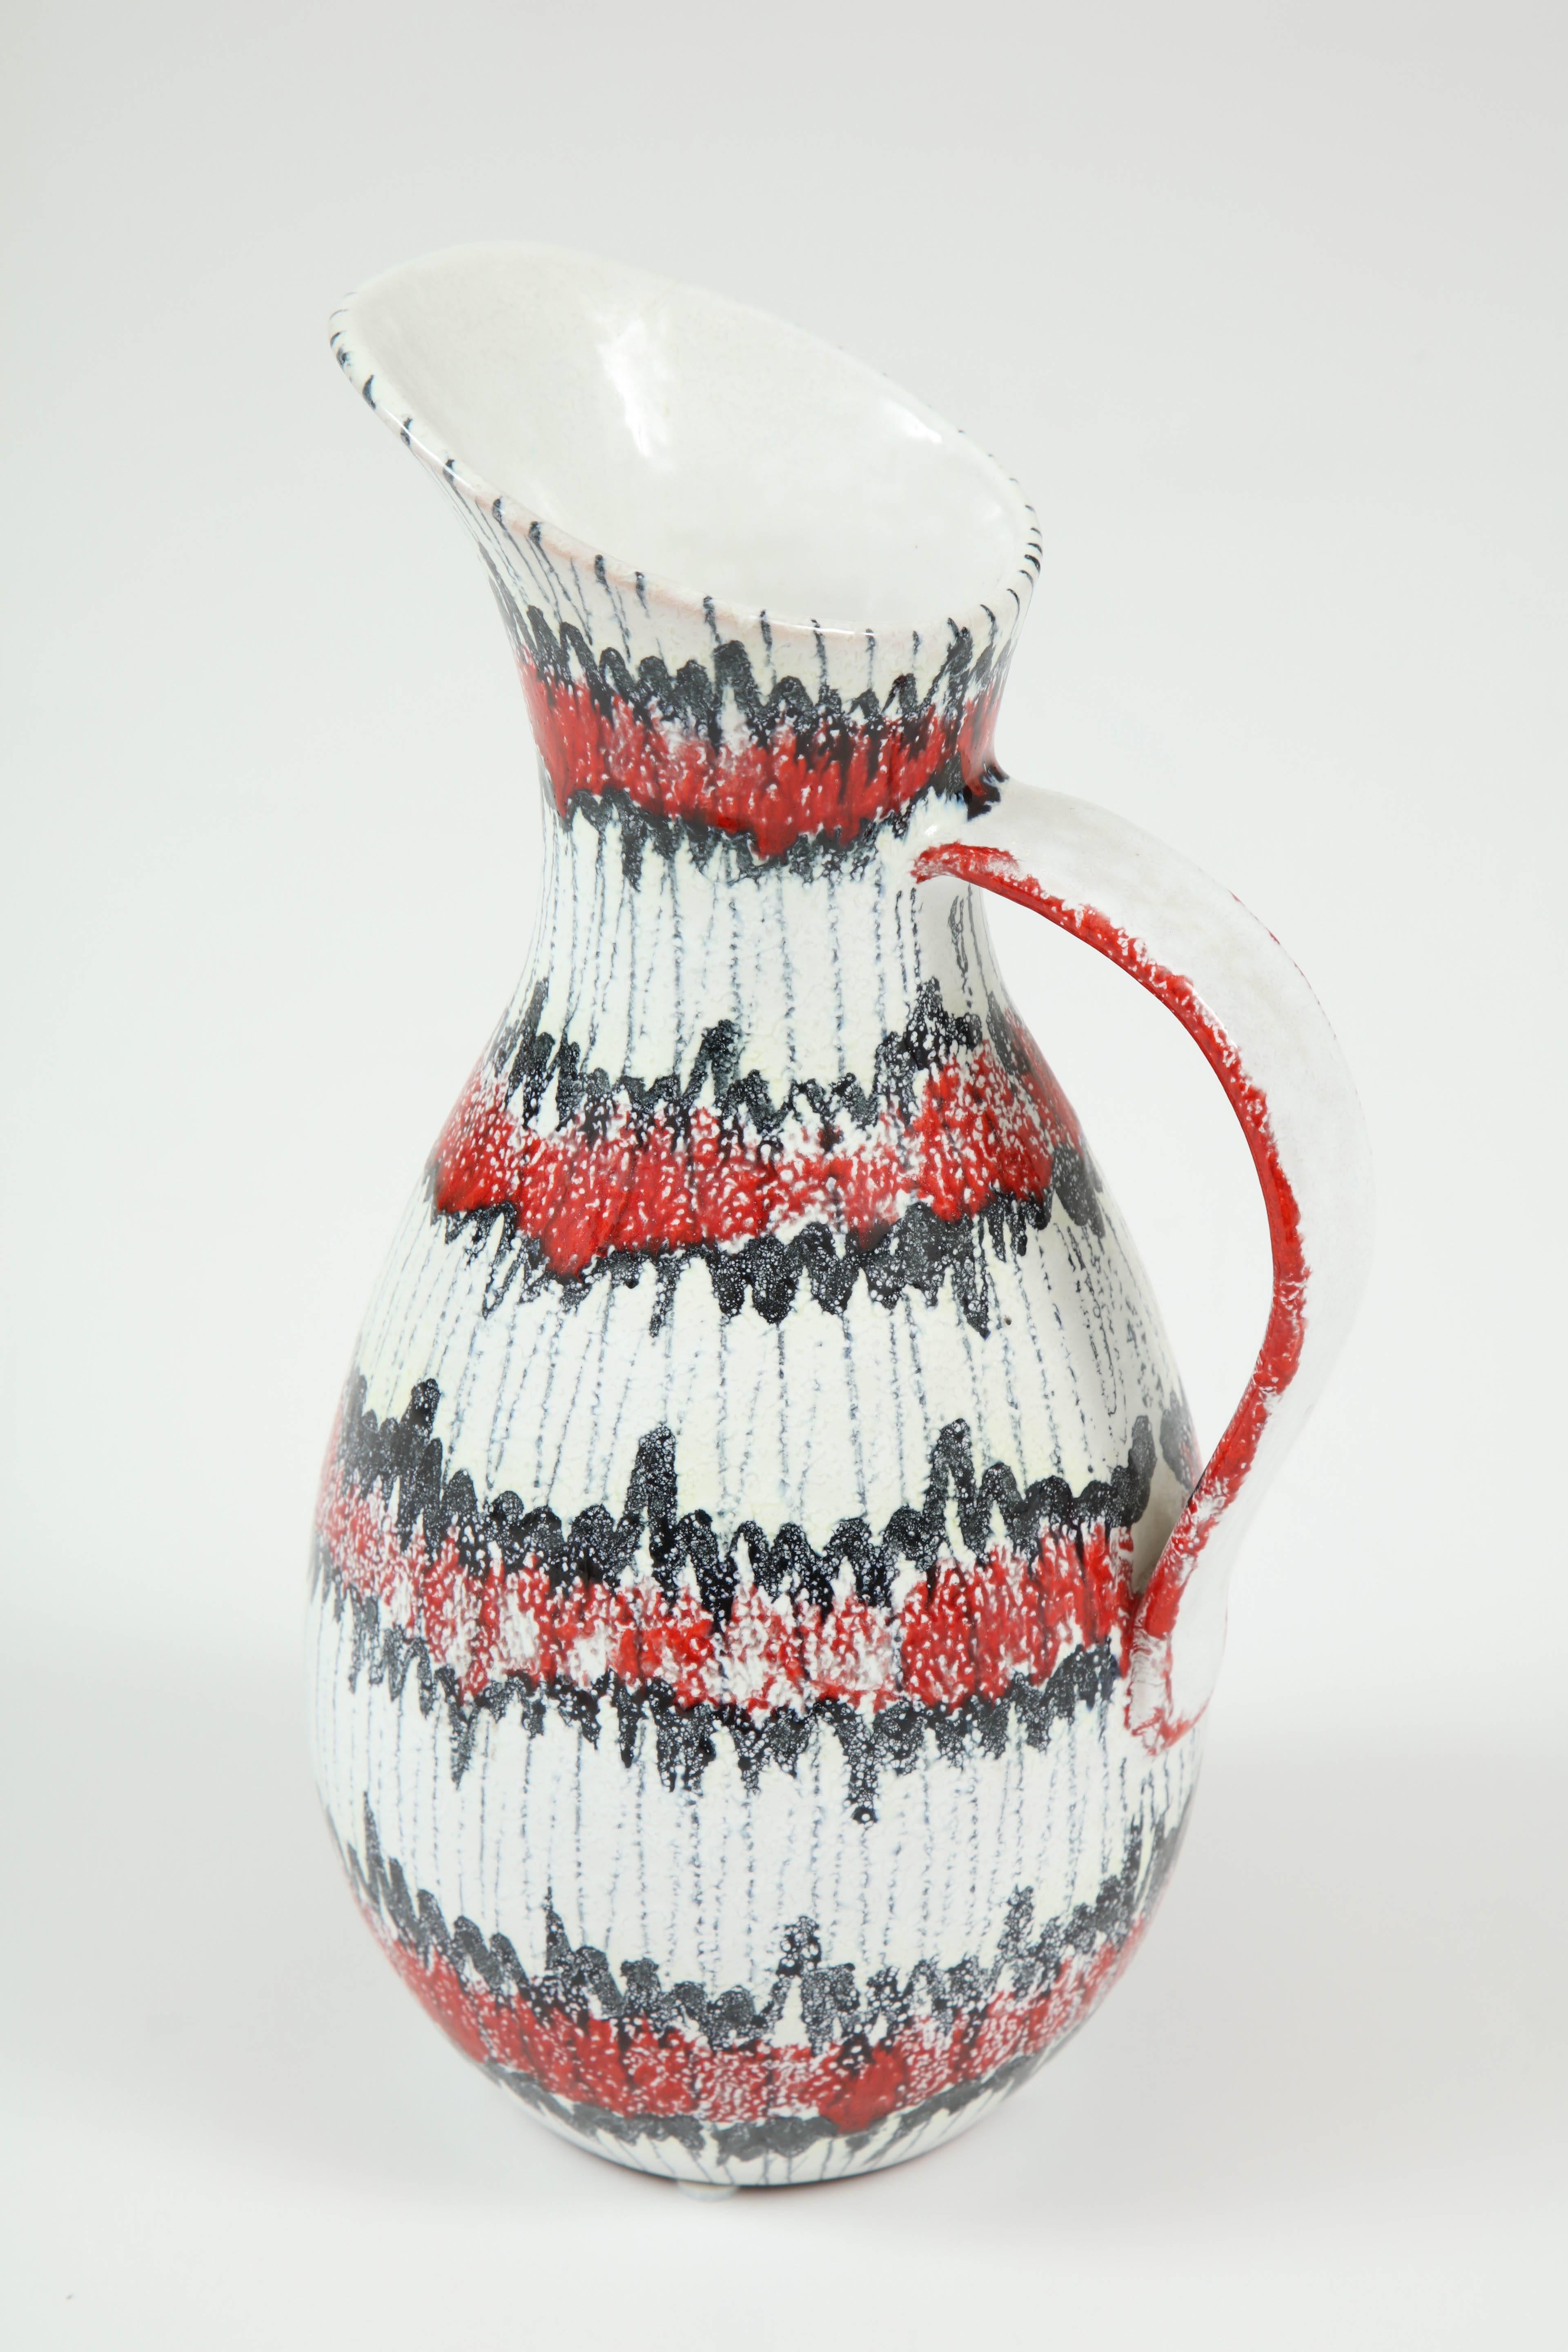 Mid-Century Modern Ceramic Pitcher, Red, White and Black, Italy, Midcentury, C 1950, Ceramic For Sale